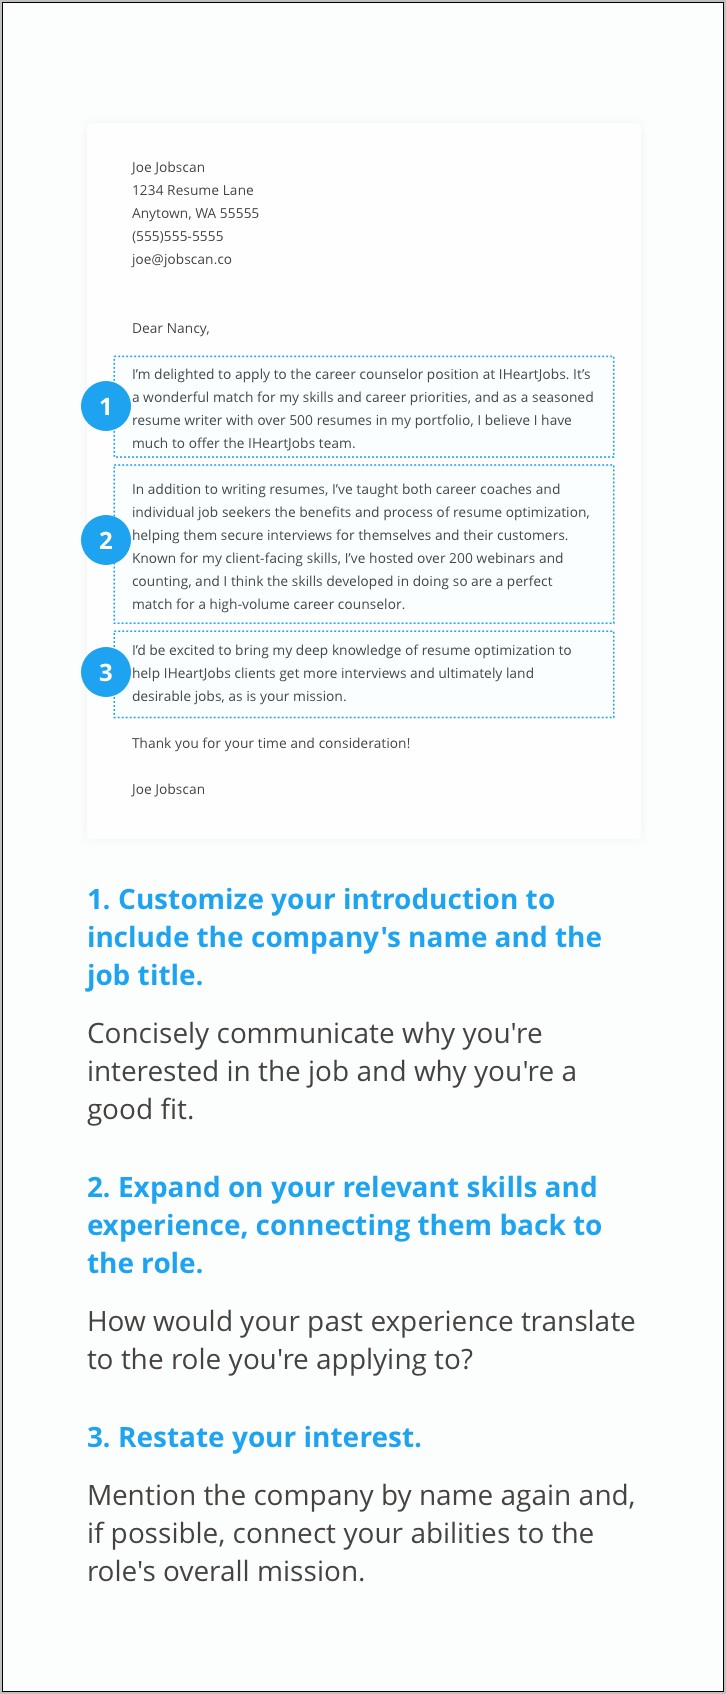 Customizing Resumes For Specific Jobs